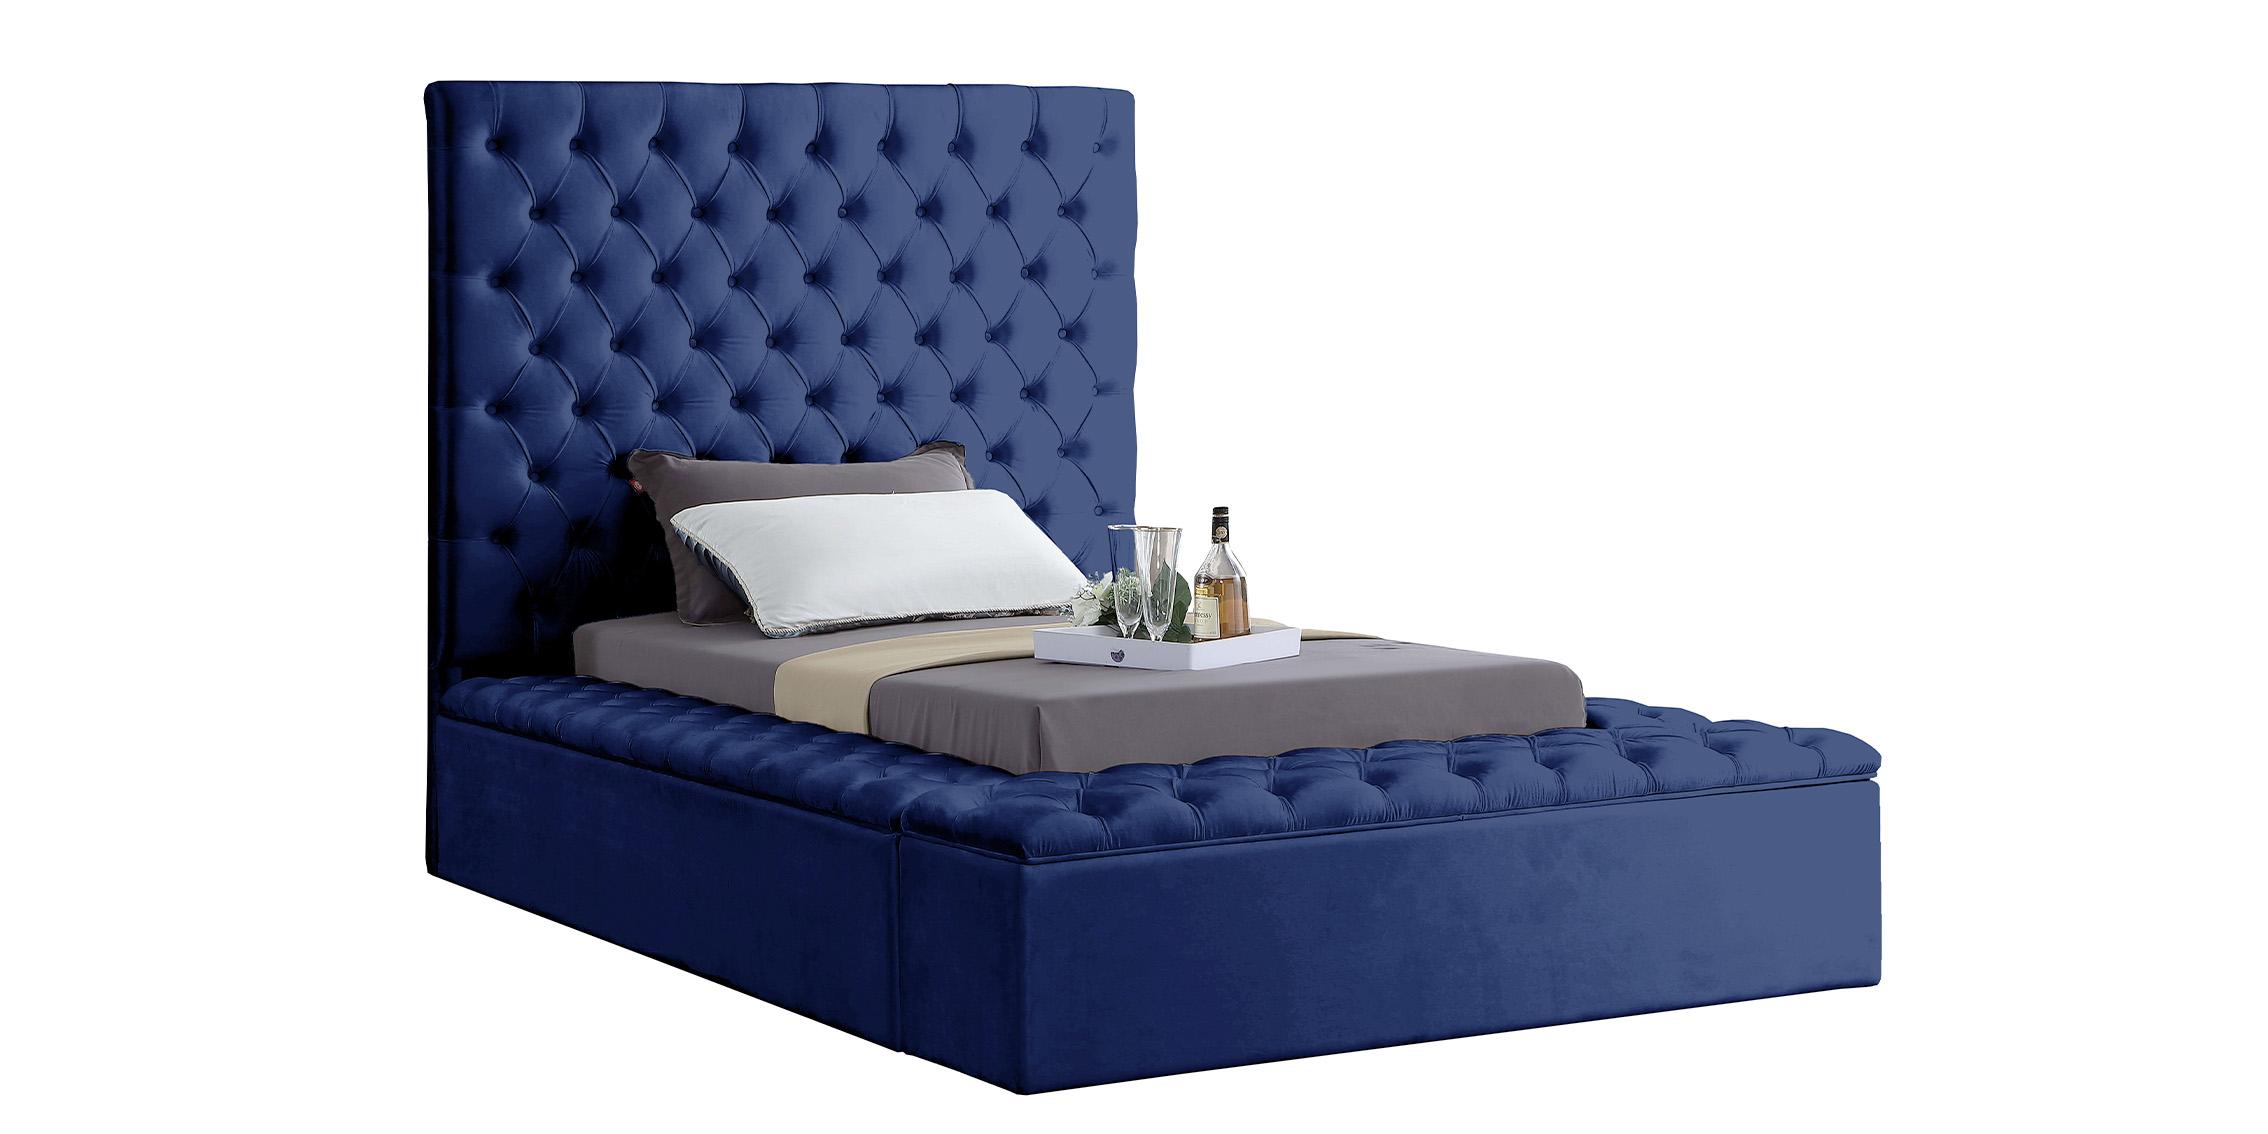 

    
Navy Velvet Tufted Storage Twin Bed BLISS Meridian Contemporary Modern
